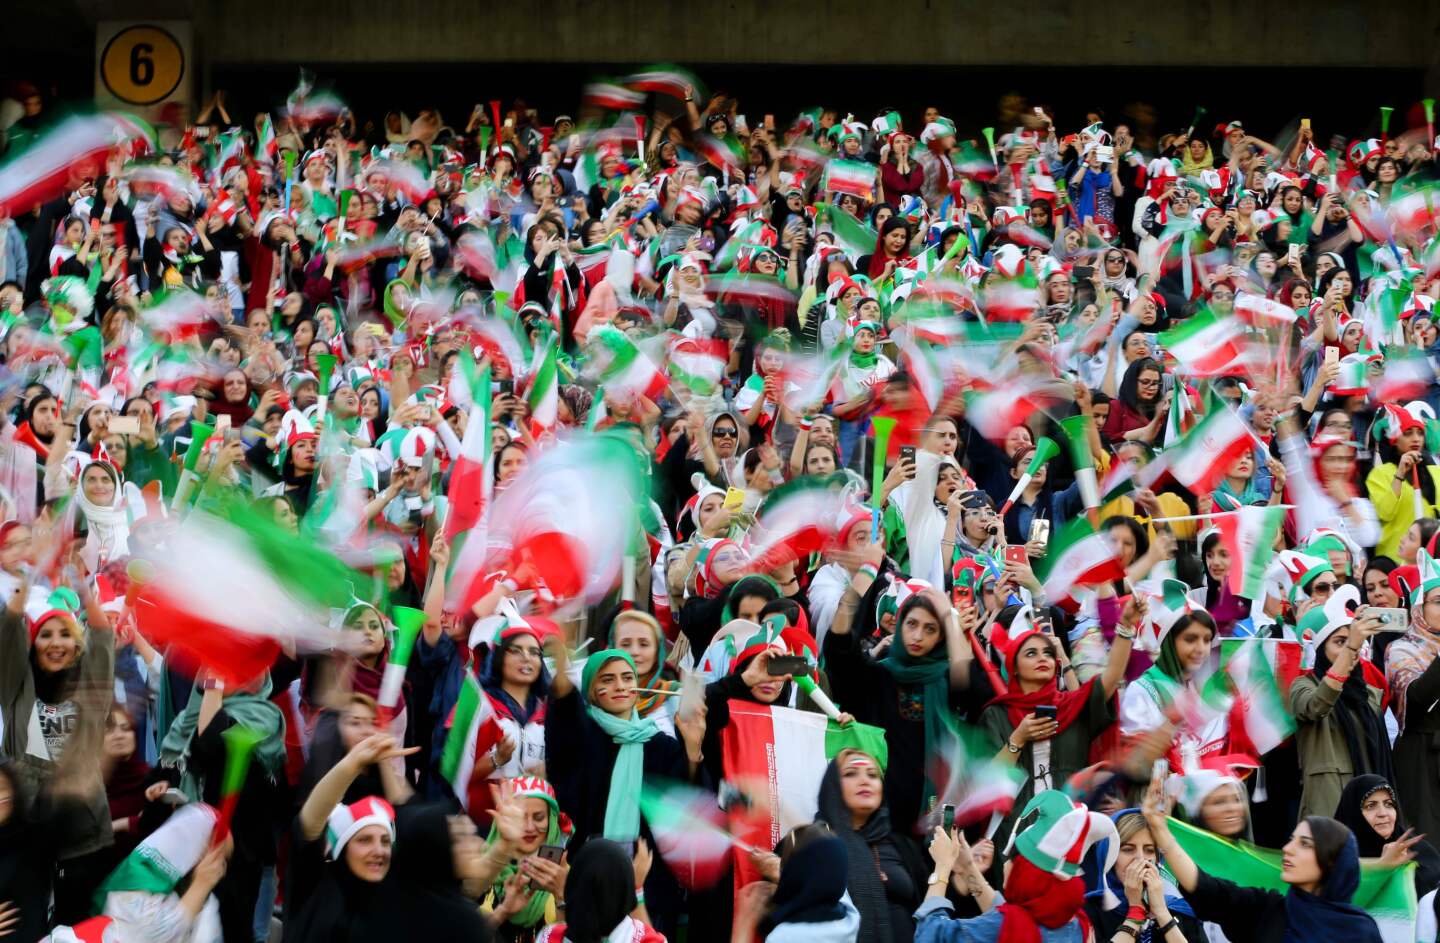 Iranian women cheer during the World Cup Qatar 2022 Group C qualification football match between Iran and Cambodia at the Azadi stadium in the capital Tehran on October 10, 2019. - The Islamic republic has barred female spectators from football and other stadiums for around 40 years, with clerics arguing they must be shielded from the masculine atmosphere and sight of semi-clad men. Women fans are attending the football match freely for the first time in decades, after FIFA threatened to suspend the country over its controversial male-only policy. (Photo by ATTA KENARE / AFP) (Photo by ATTA KENARE/AFP via Getty Images) ** OUTS - ELSENT, FPG, CM - OUTS * NM, PH, VA if sourced by CT, LA or MoD **